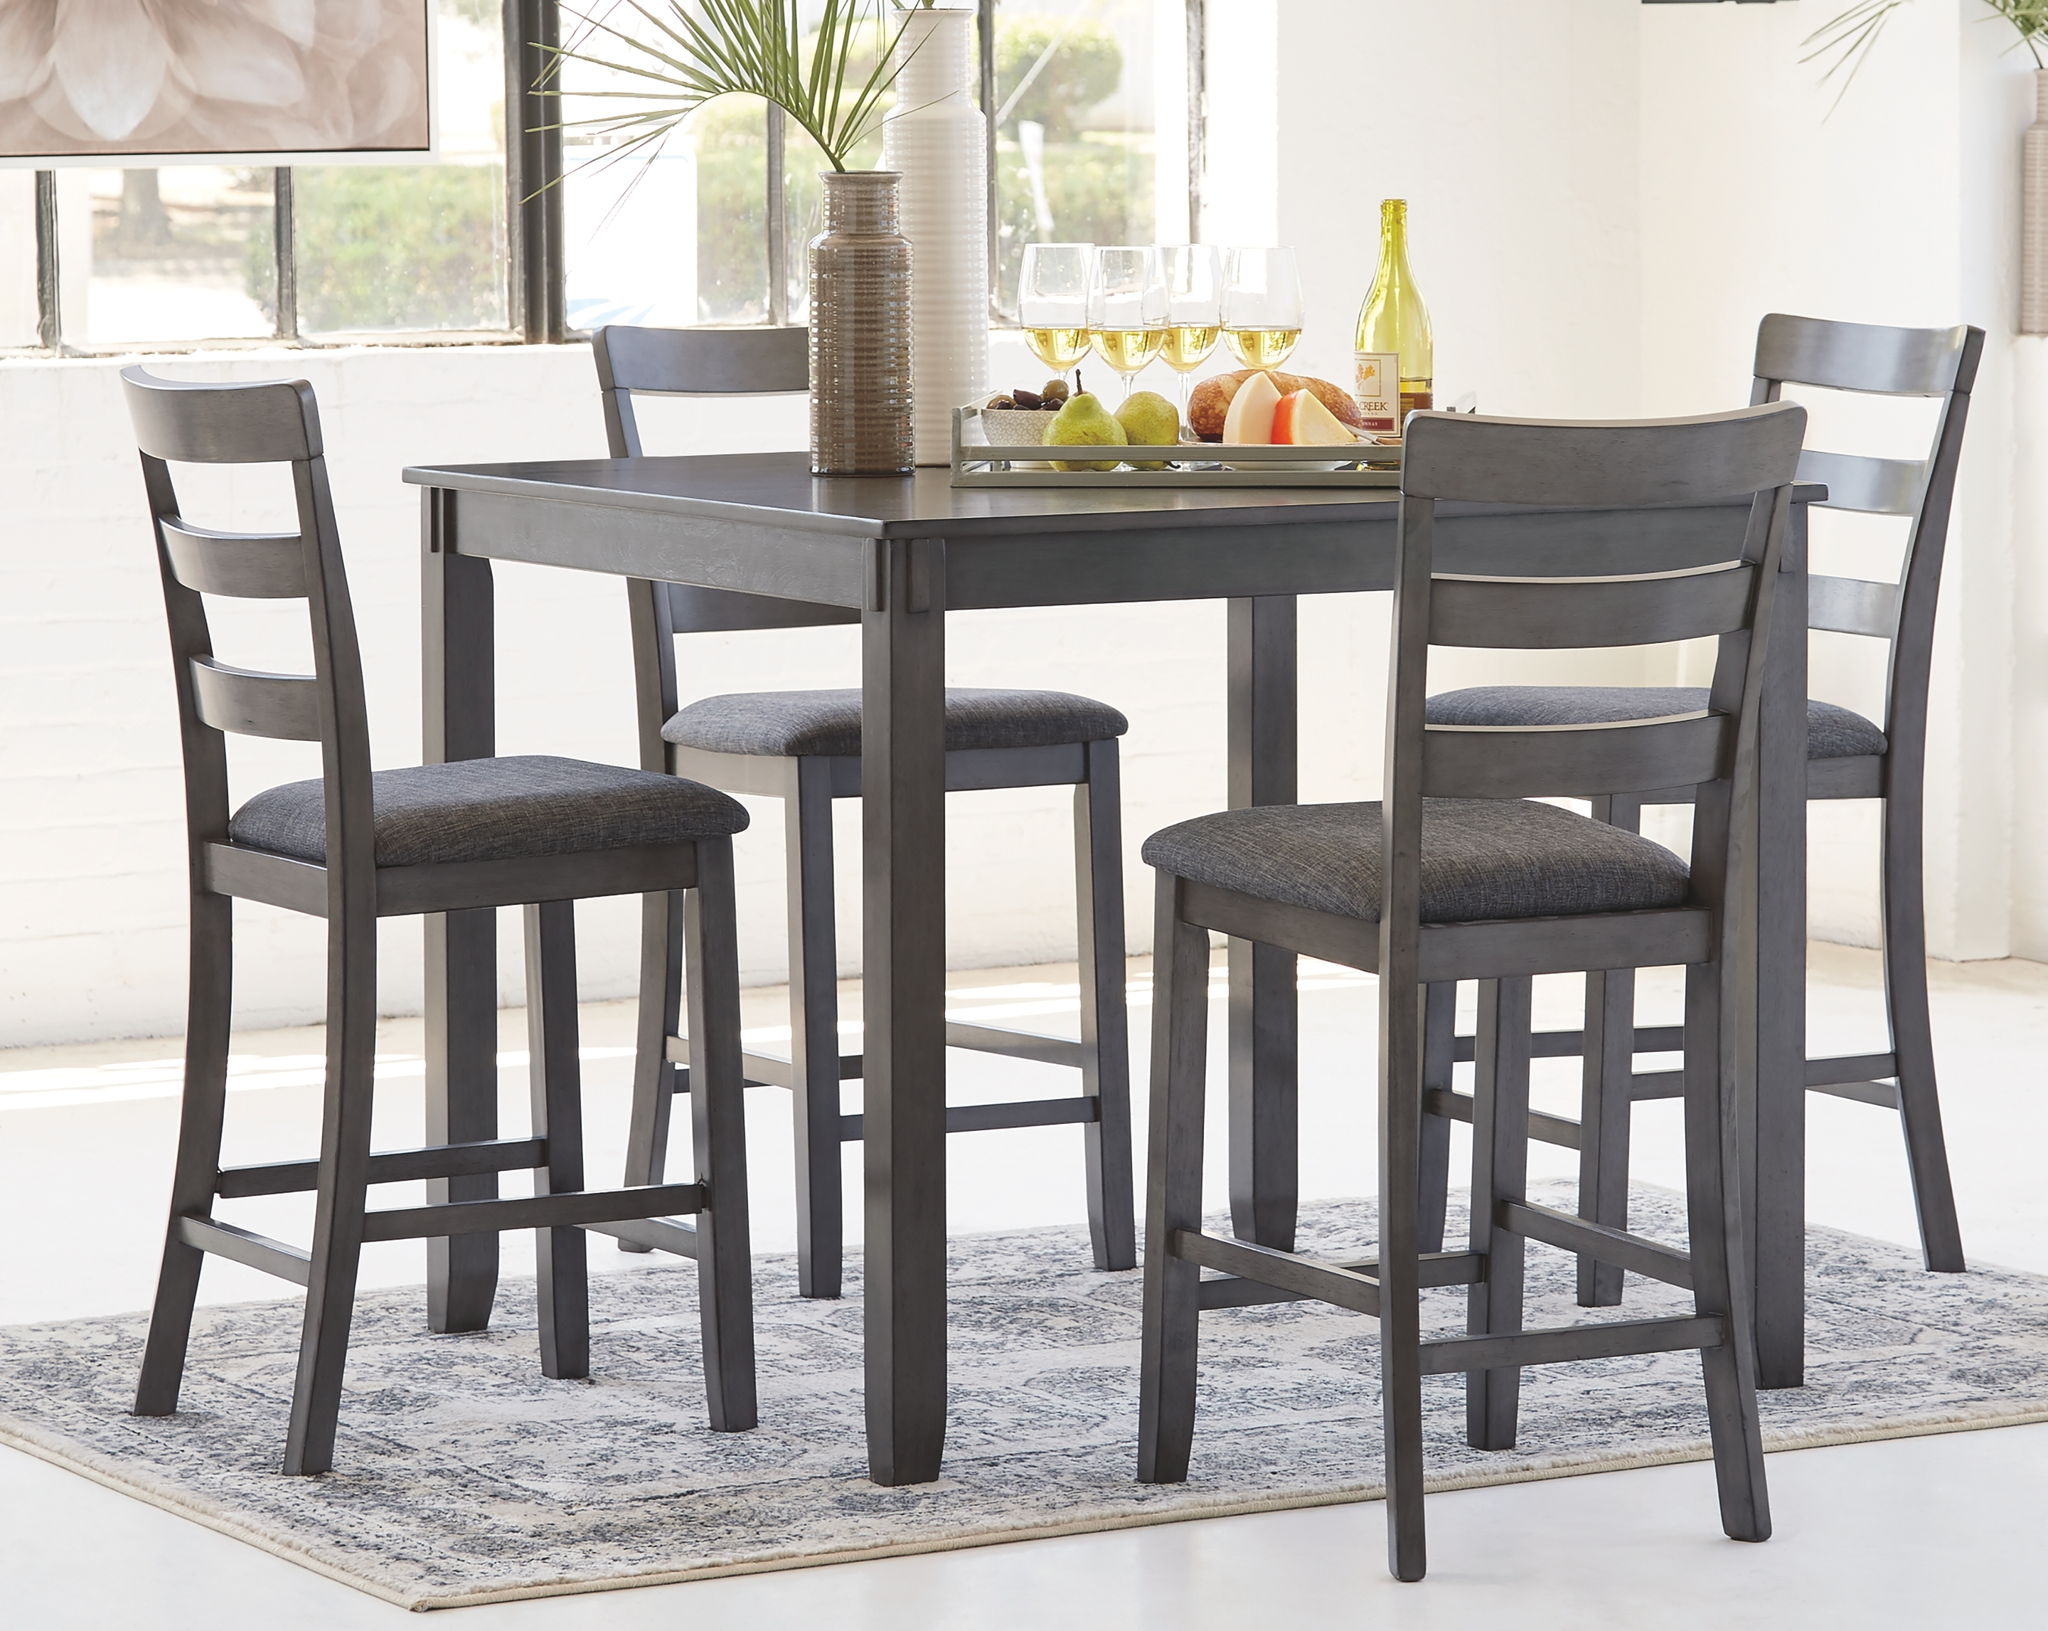 dining room table stools